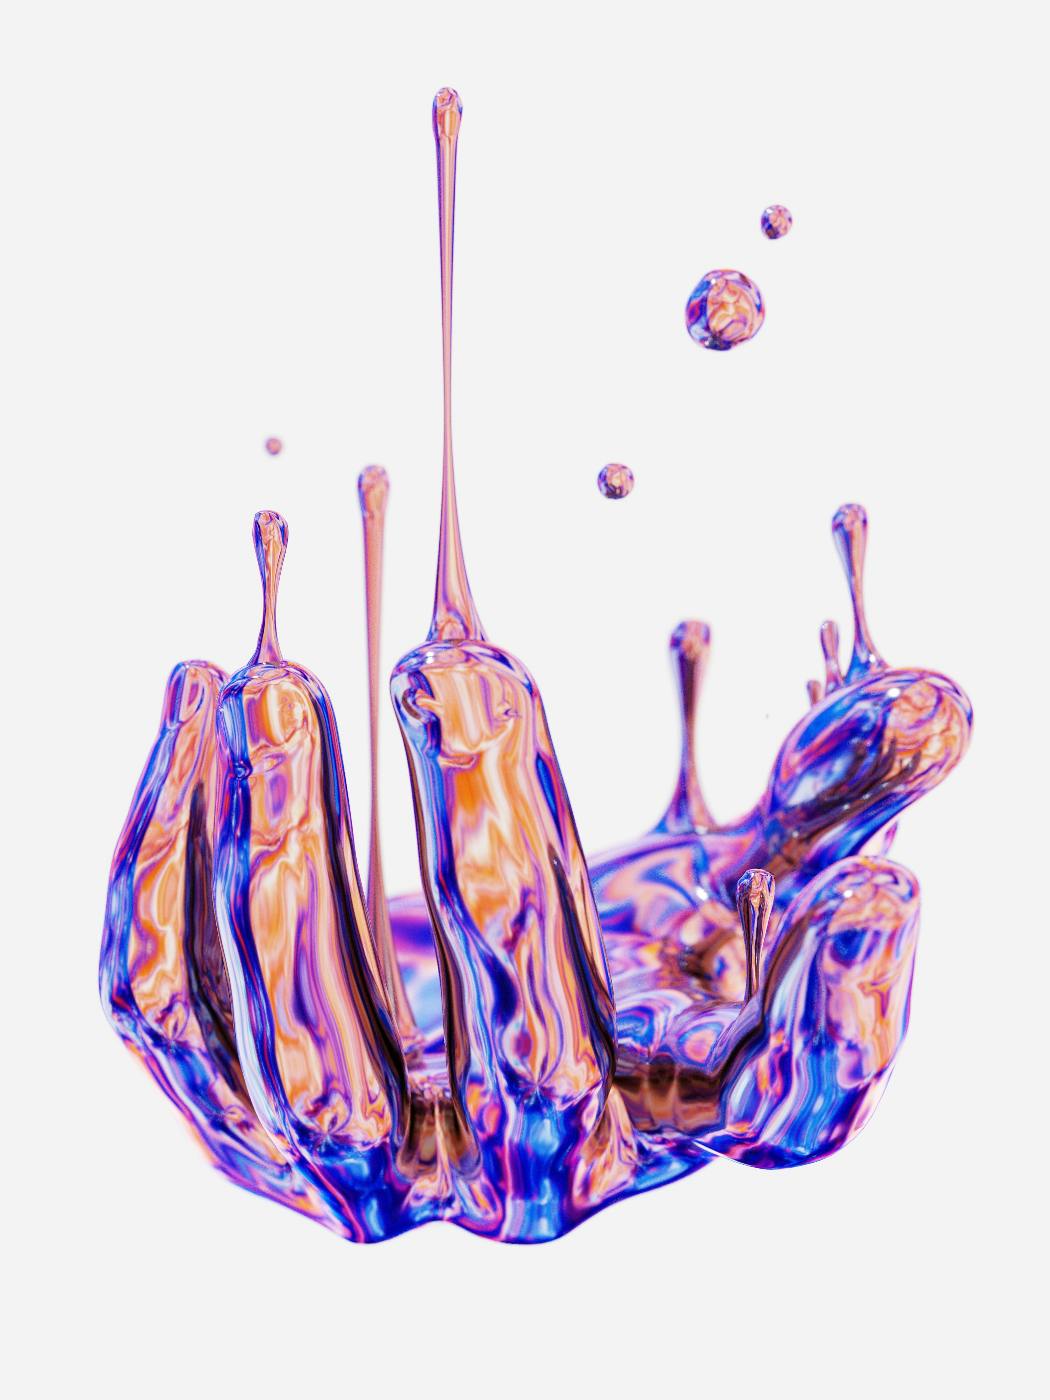 a digital rendering of a hand